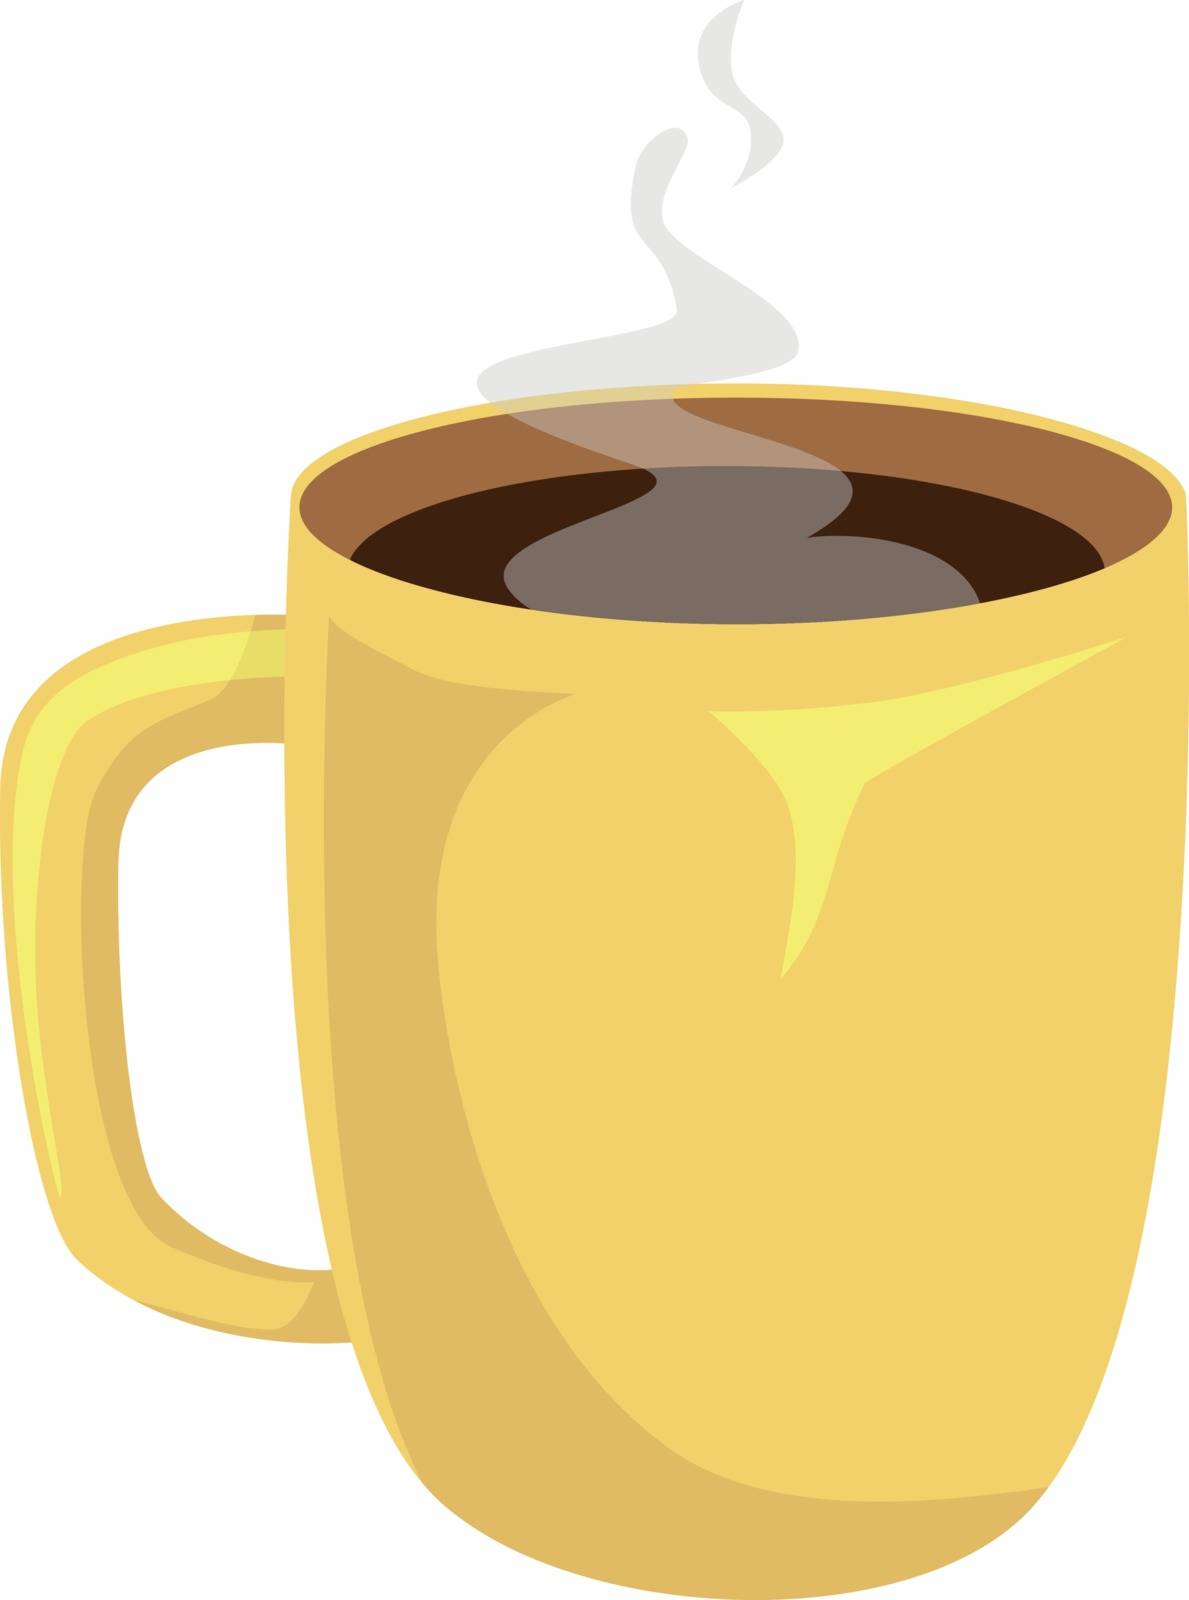 Cup of coffee isolated. Coffee cup vector illustration